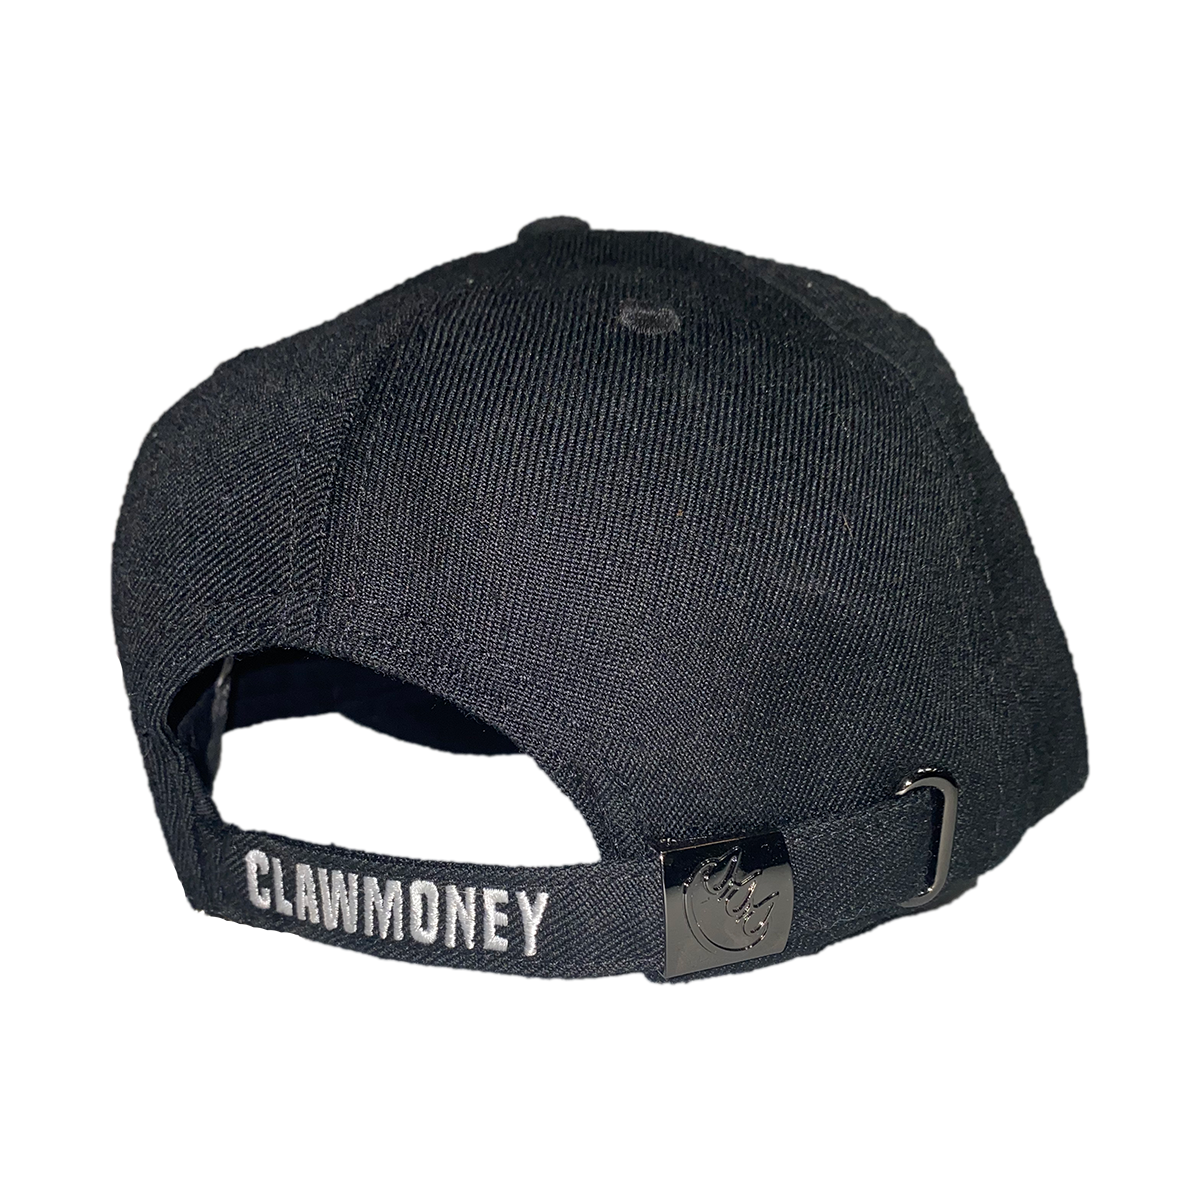 BLACK EMBROIDERED CLAW MONEY HAT